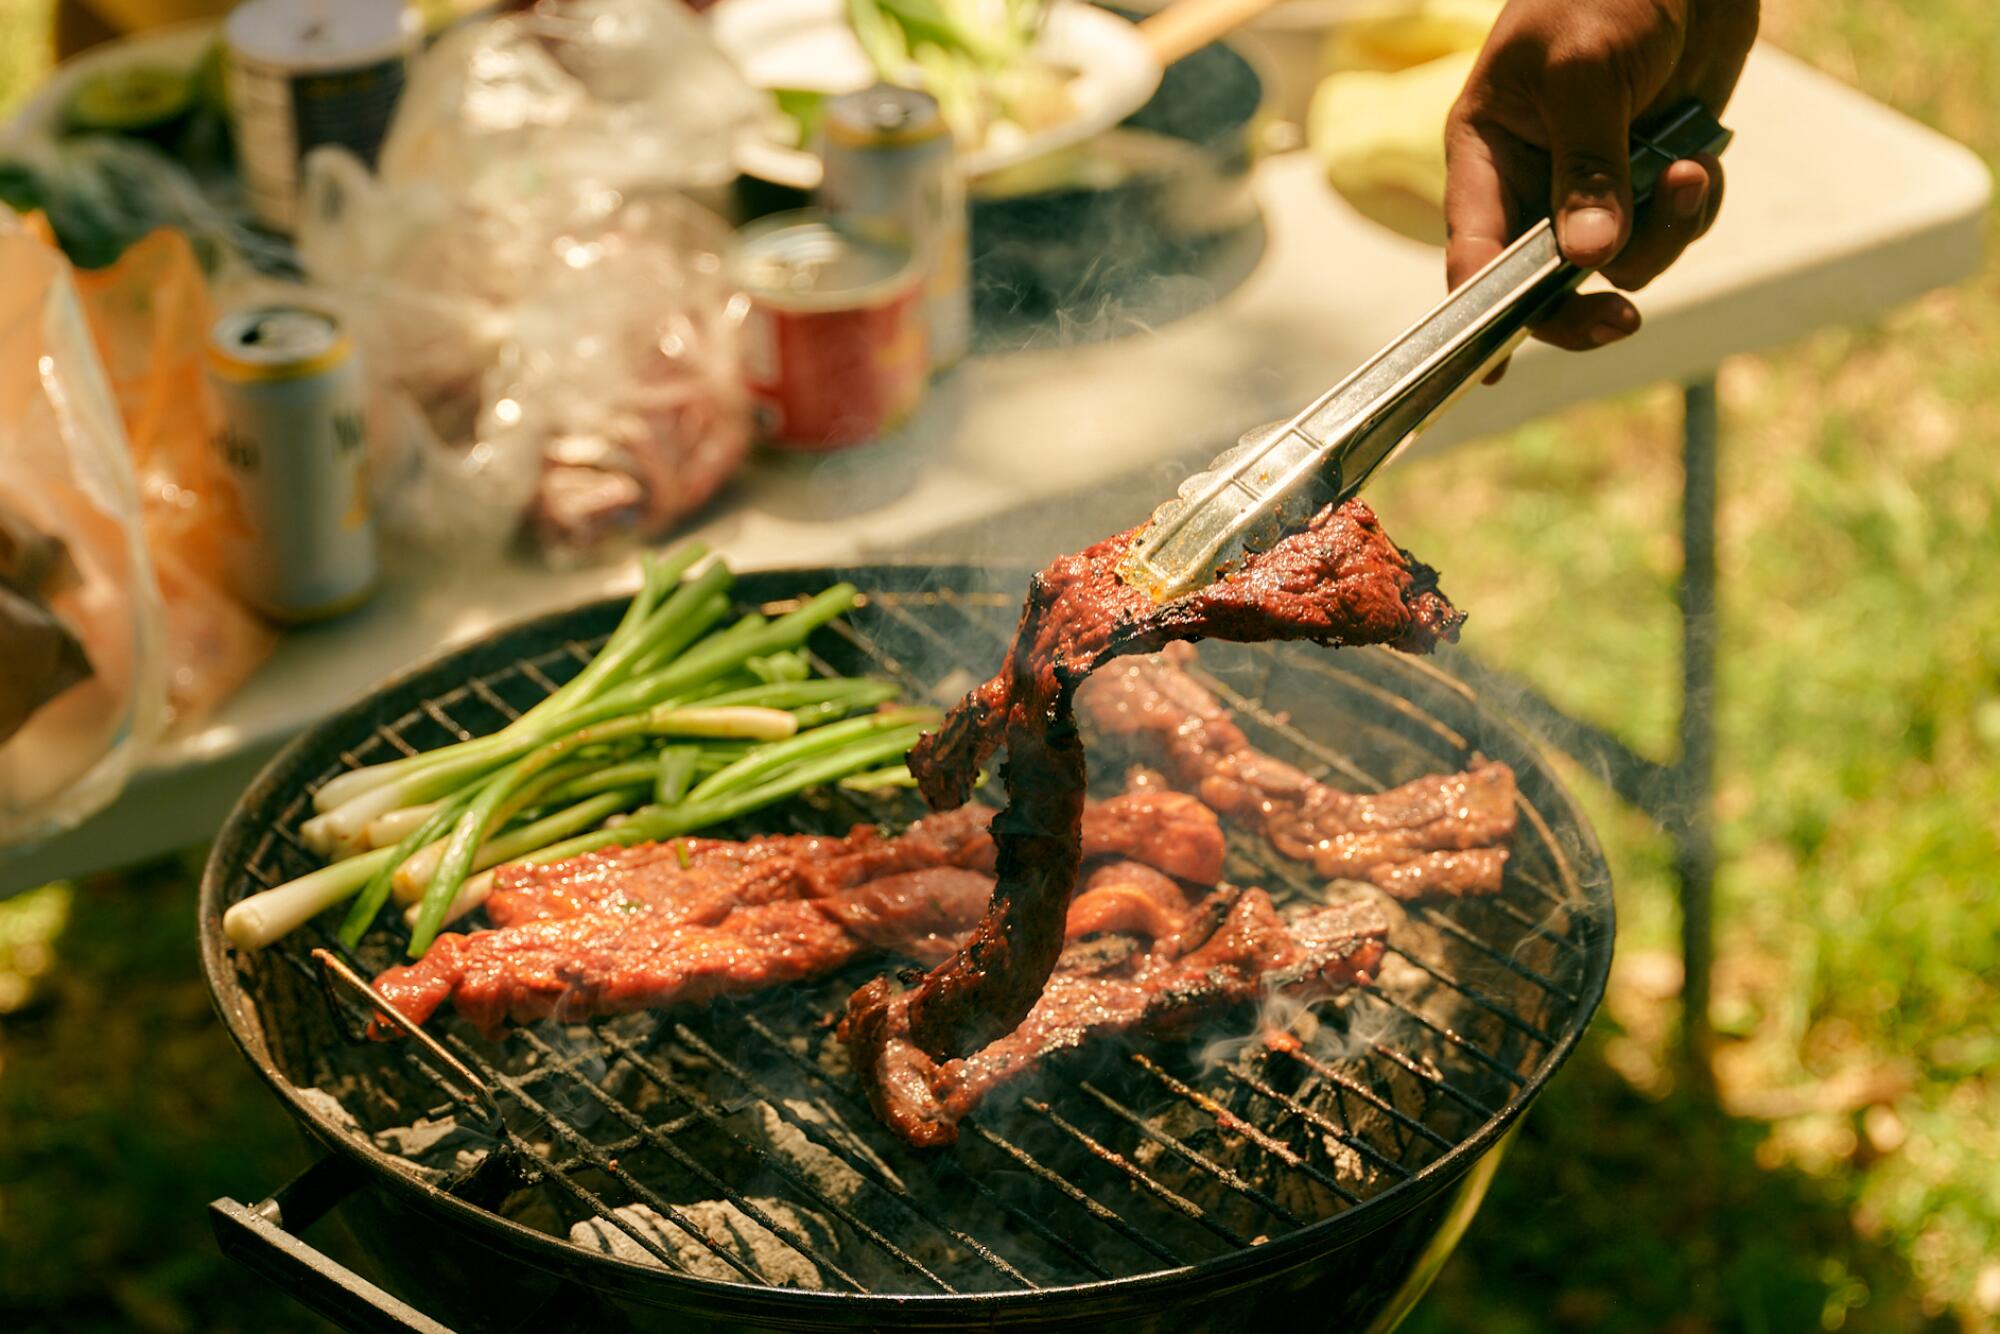 Tongs pick up one of the pieces of carne asada on a grill alongside scallions